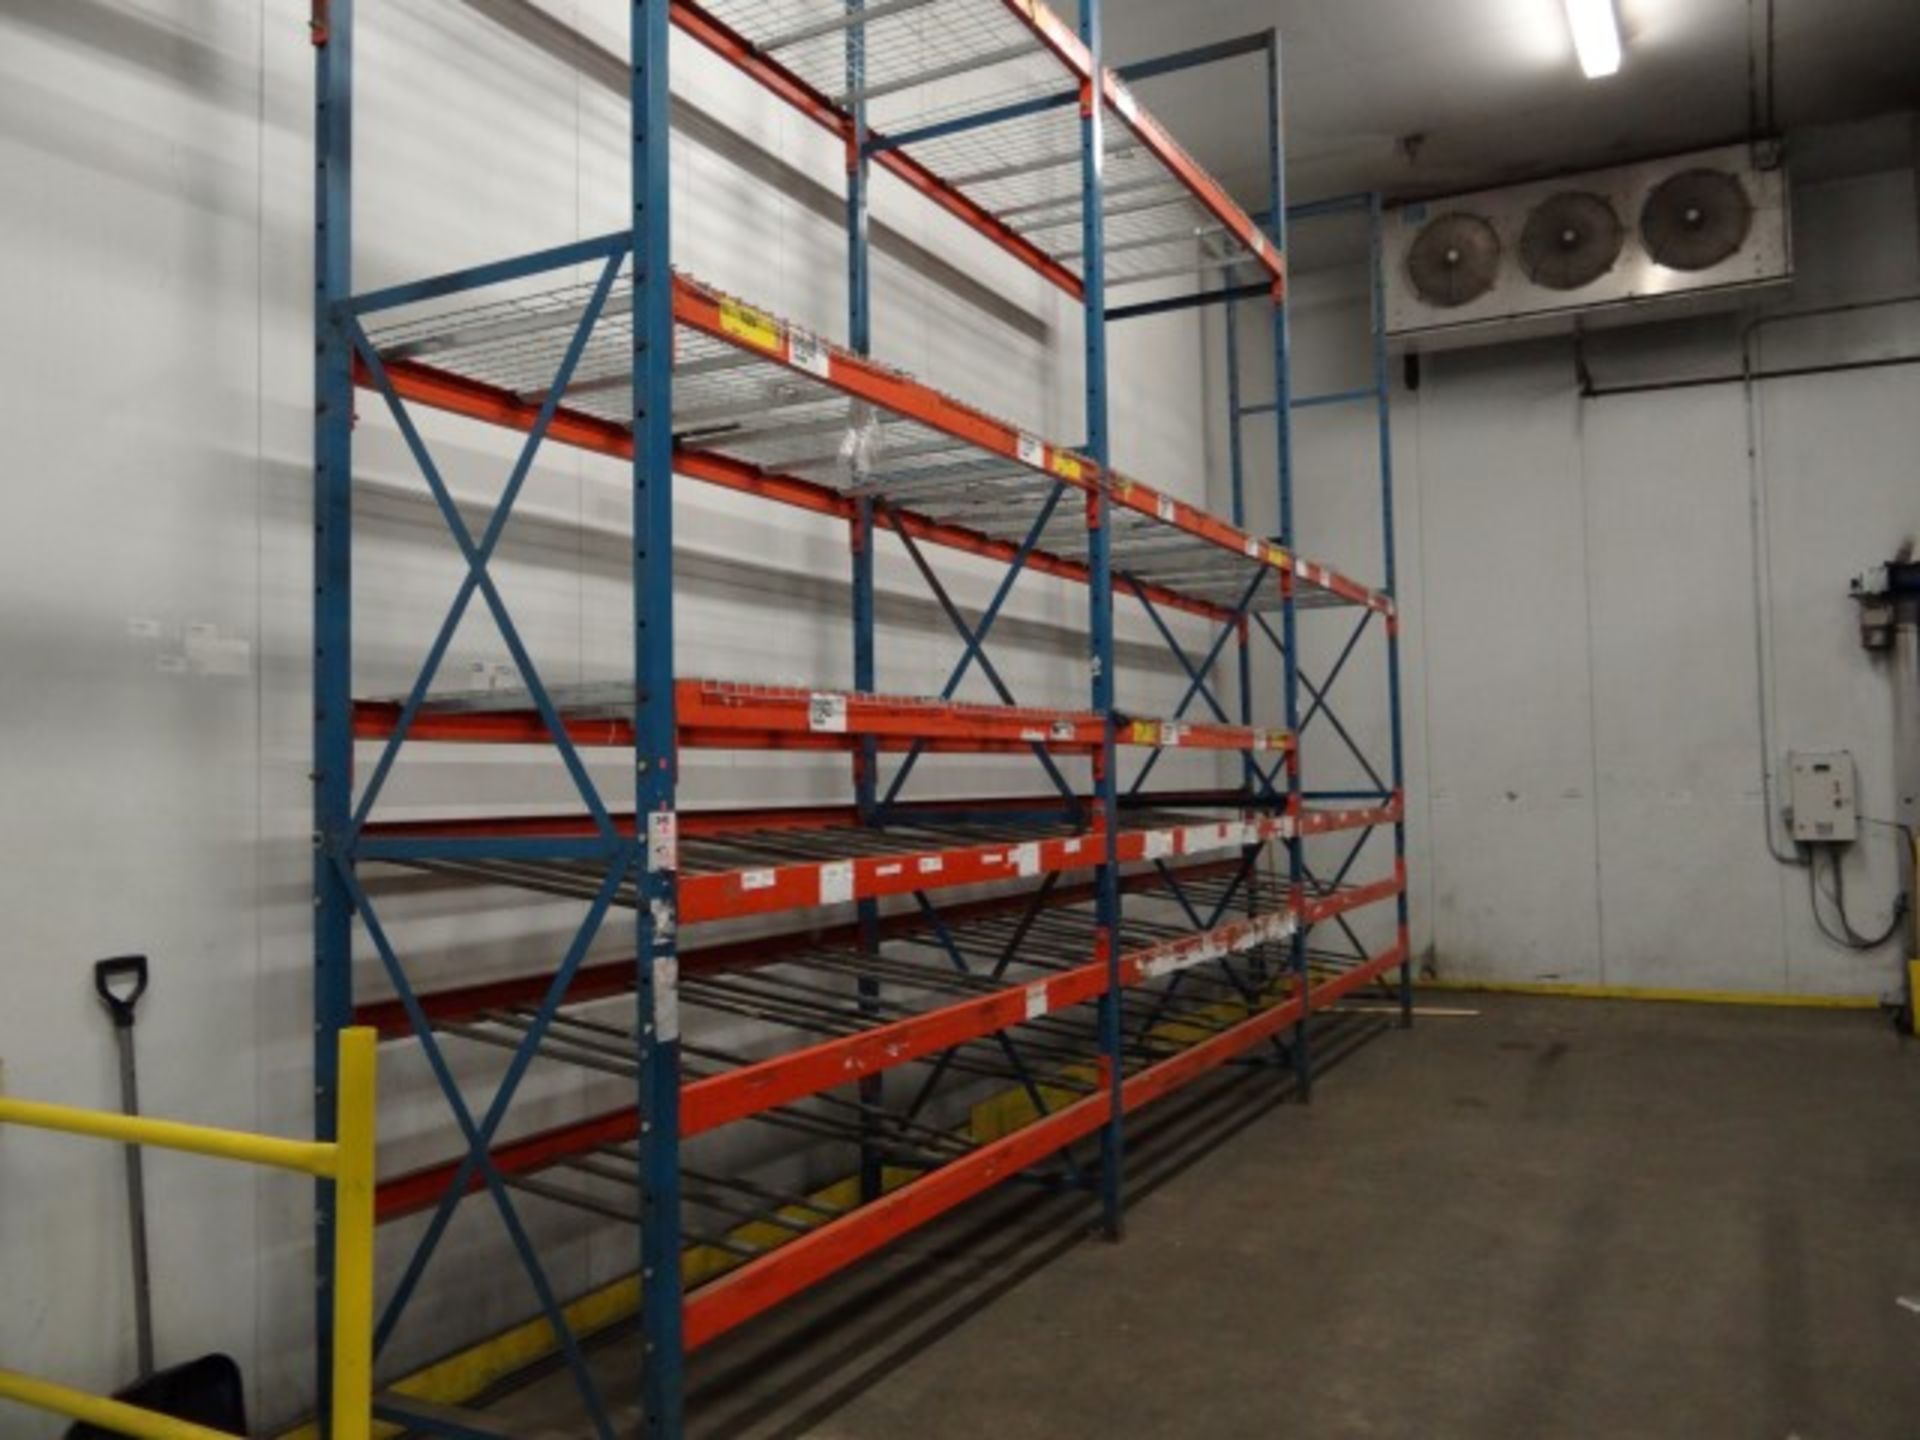 10 Sections of Pallet Racking Approximately 8x4x18 - Image 3 of 3